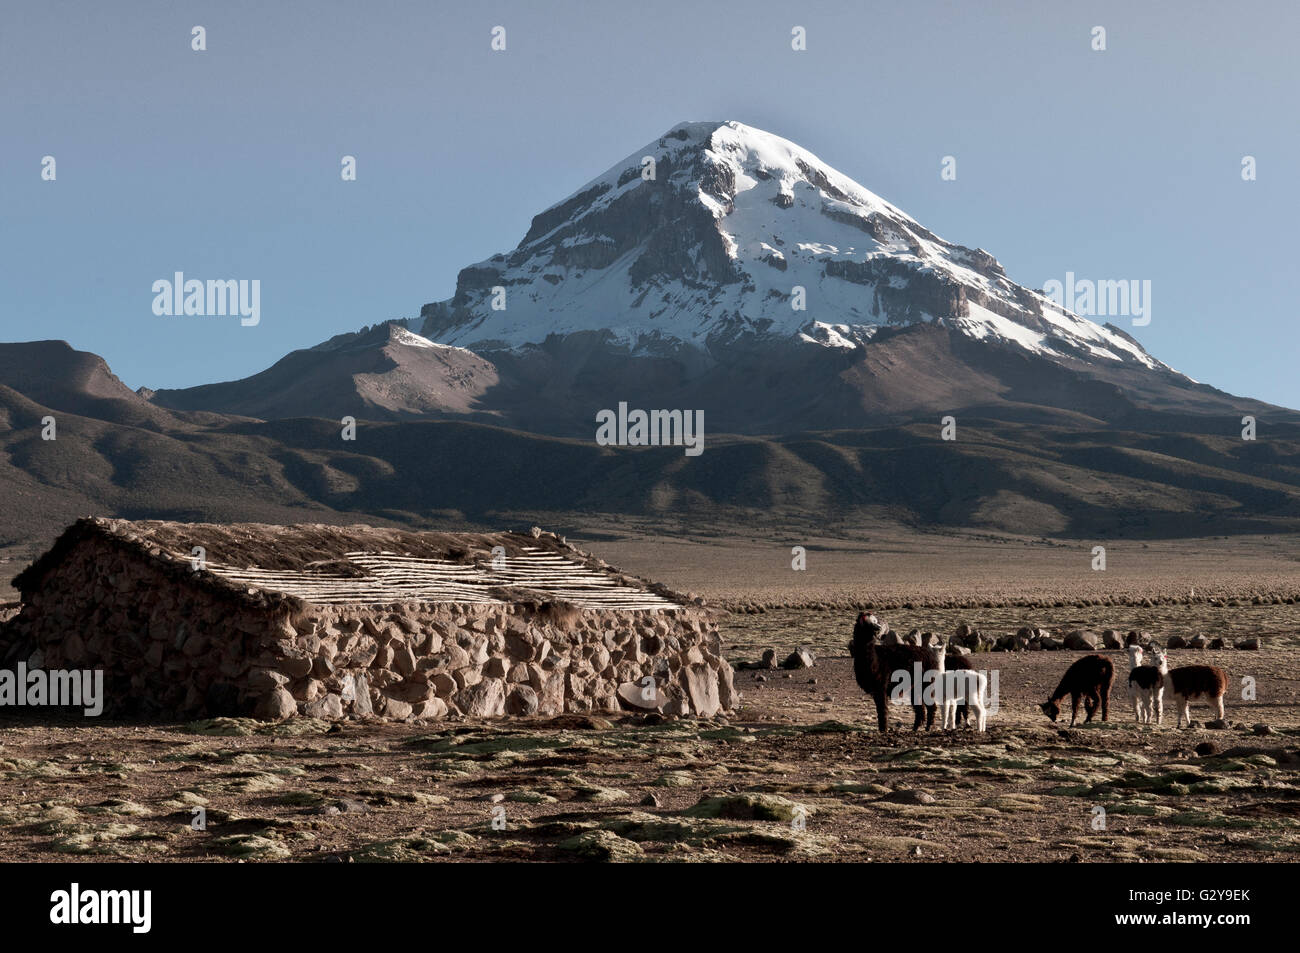 Sajama NP, Alpacas And Snow-Capped Volcano In The Background Stock Photo